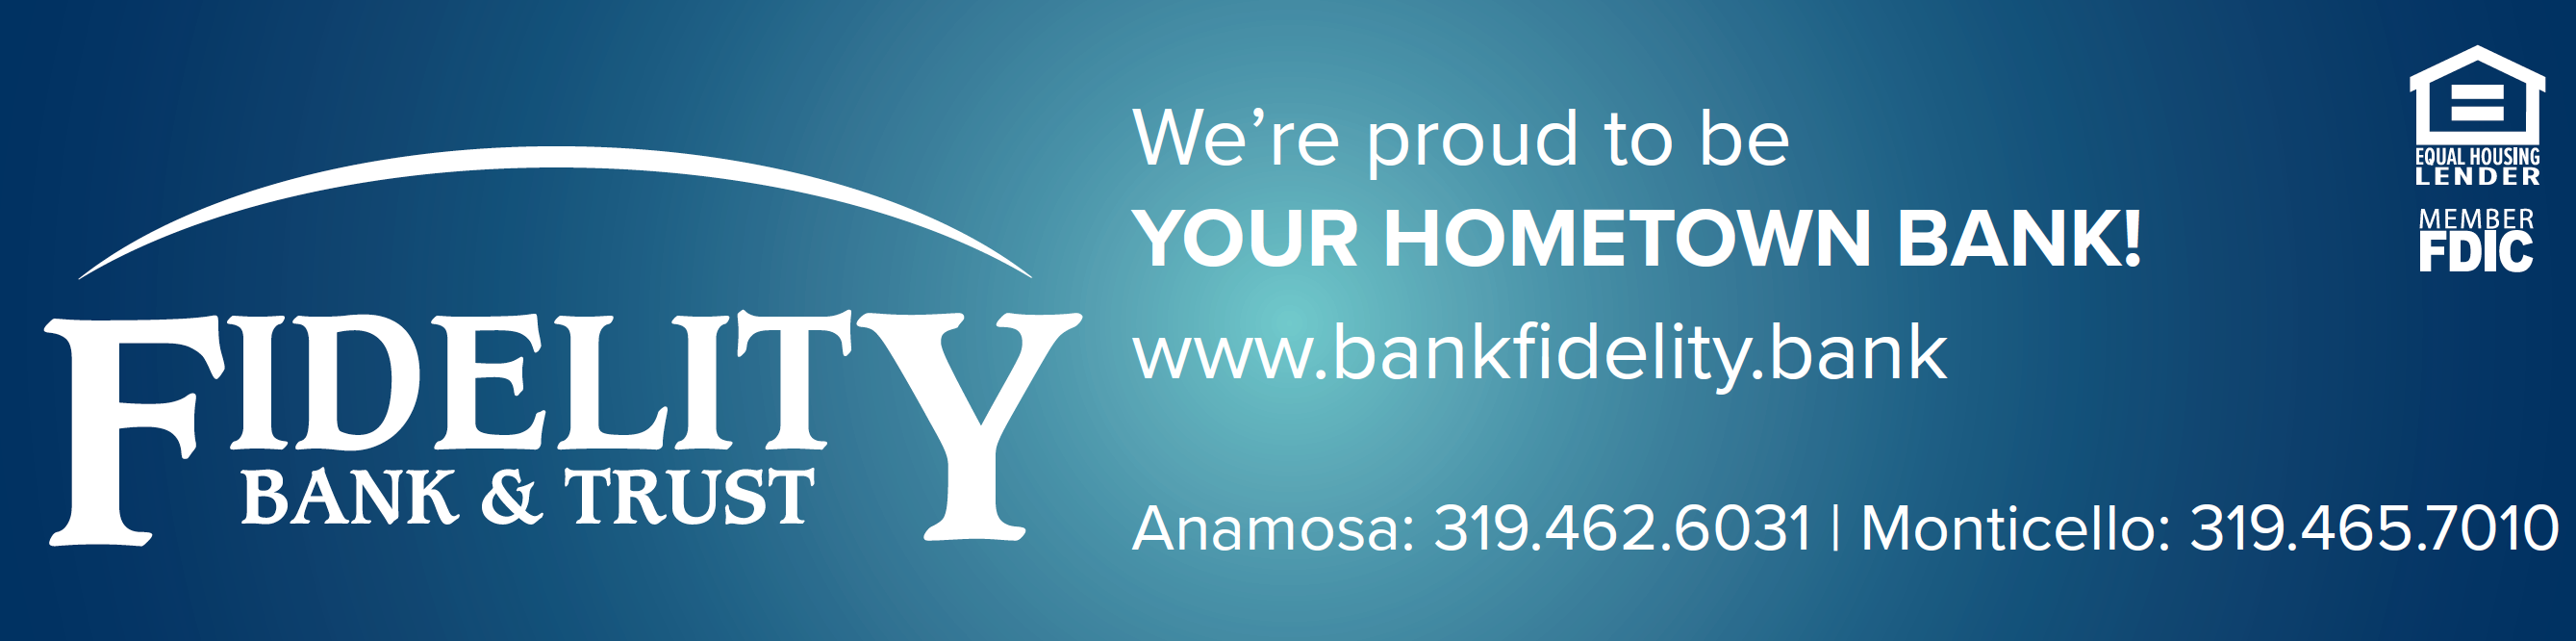 Fidelity Bank and Trust, We Are Your Hometown Bank.